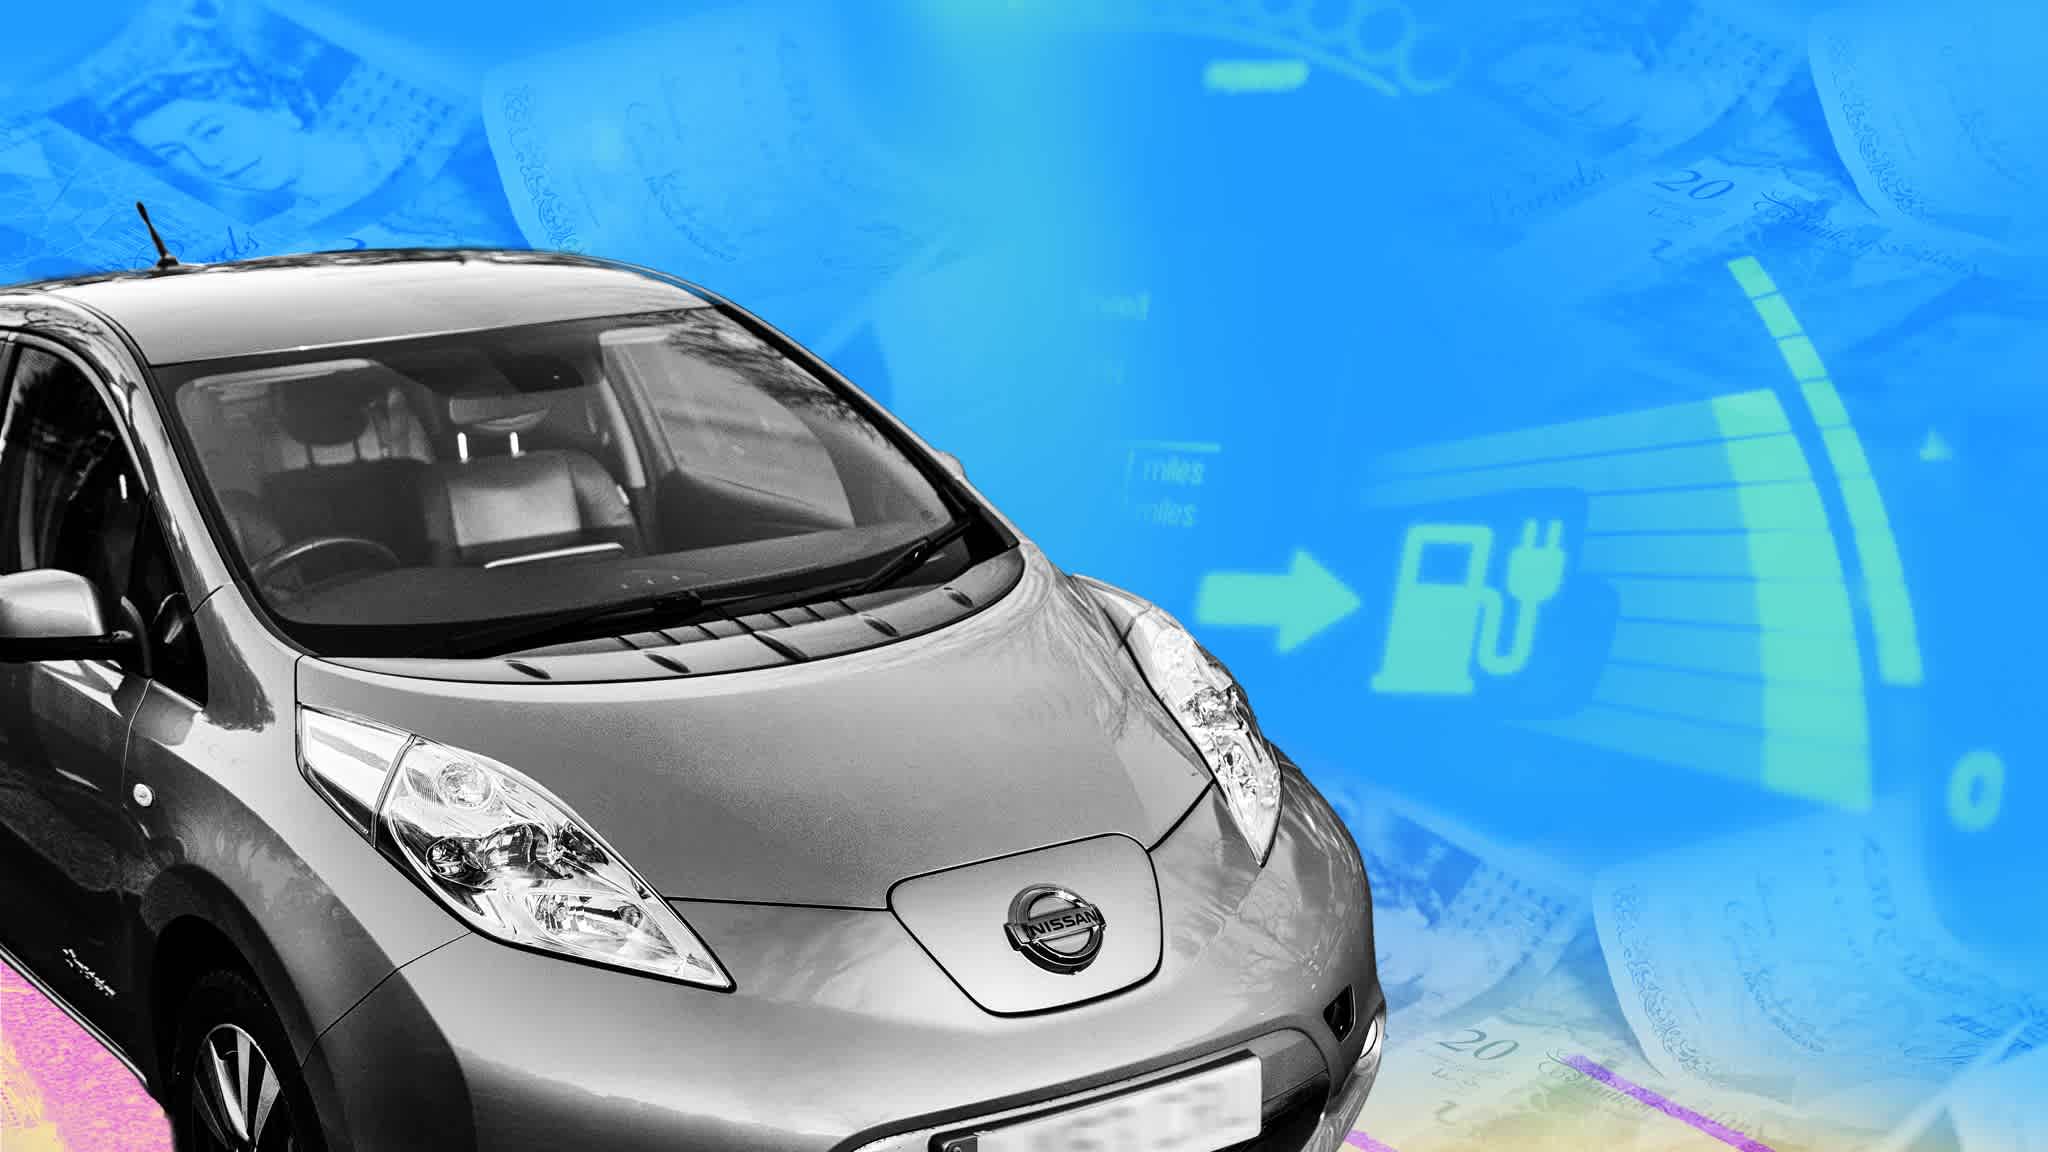 The best ways to buy an electric car